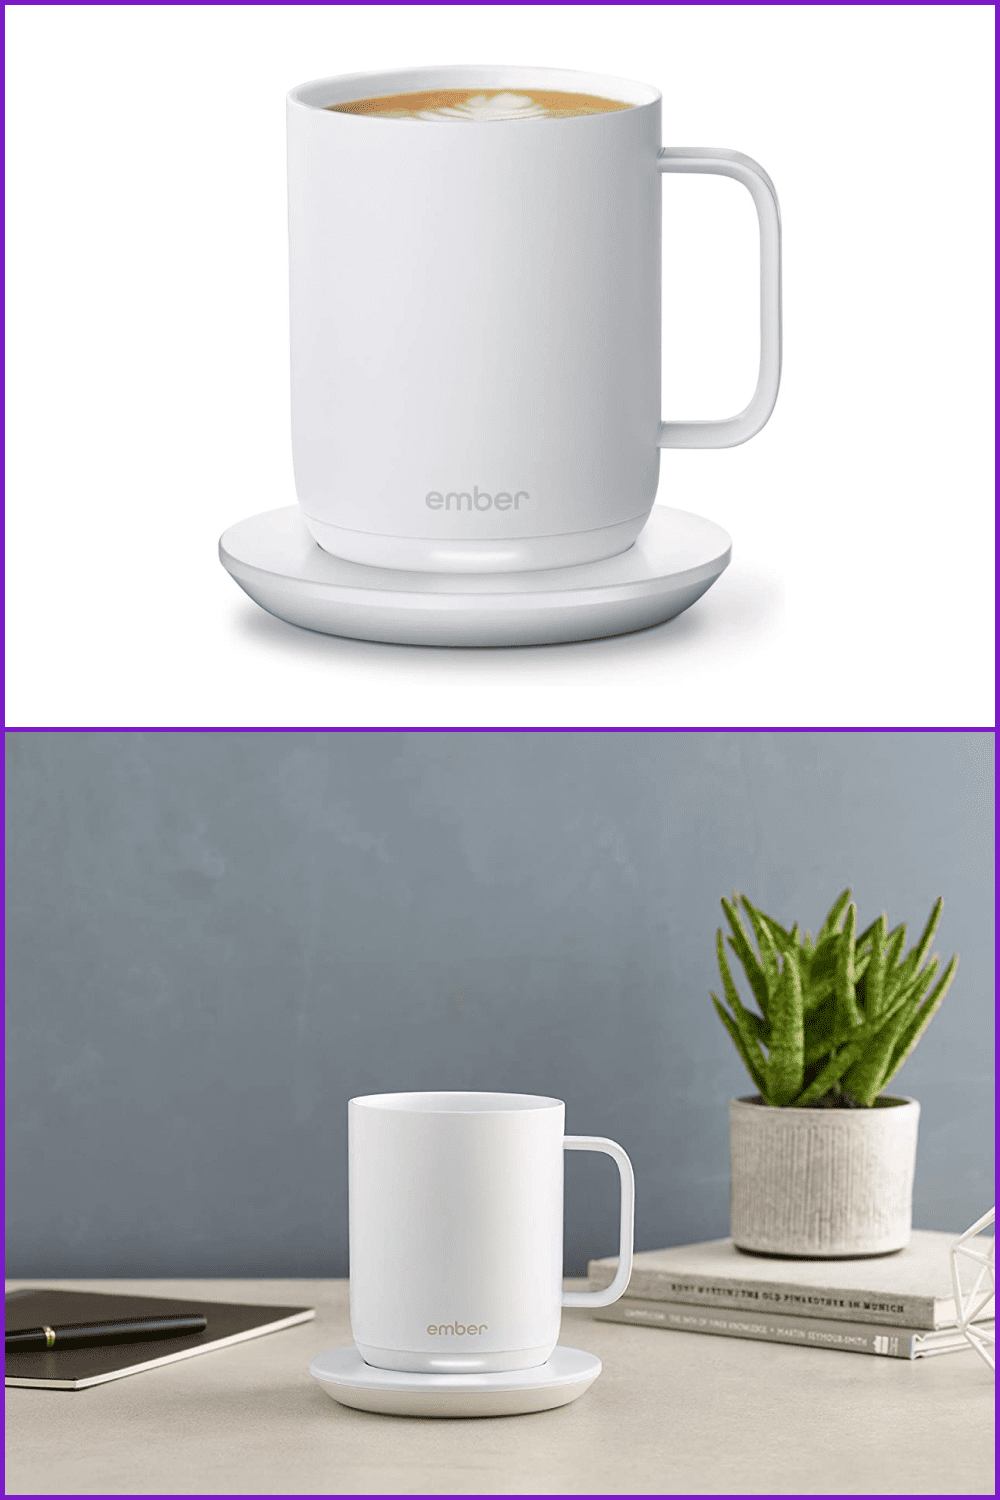 Cup with portable warmer. A very convenient and stylish device.